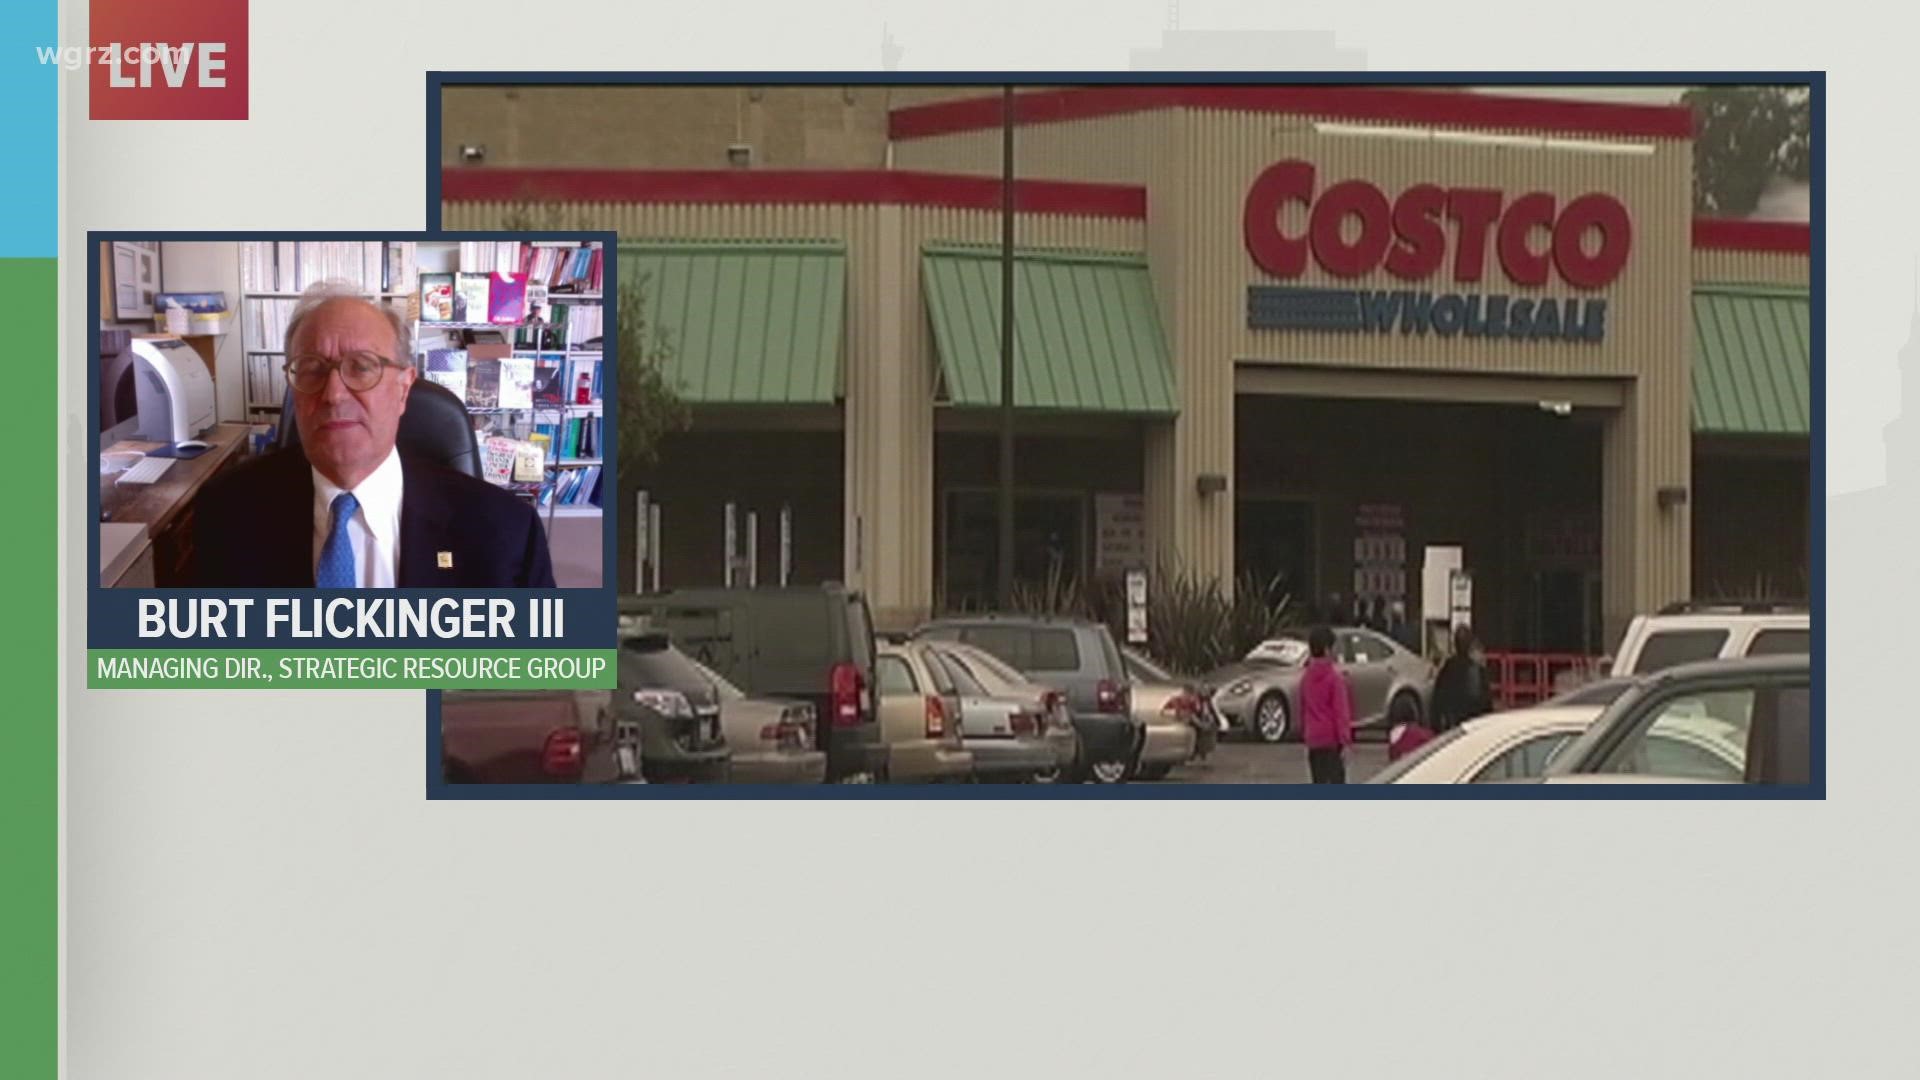 Burt Flickinger III says he is hearing that Costco will open up a Western New York location during the next year.